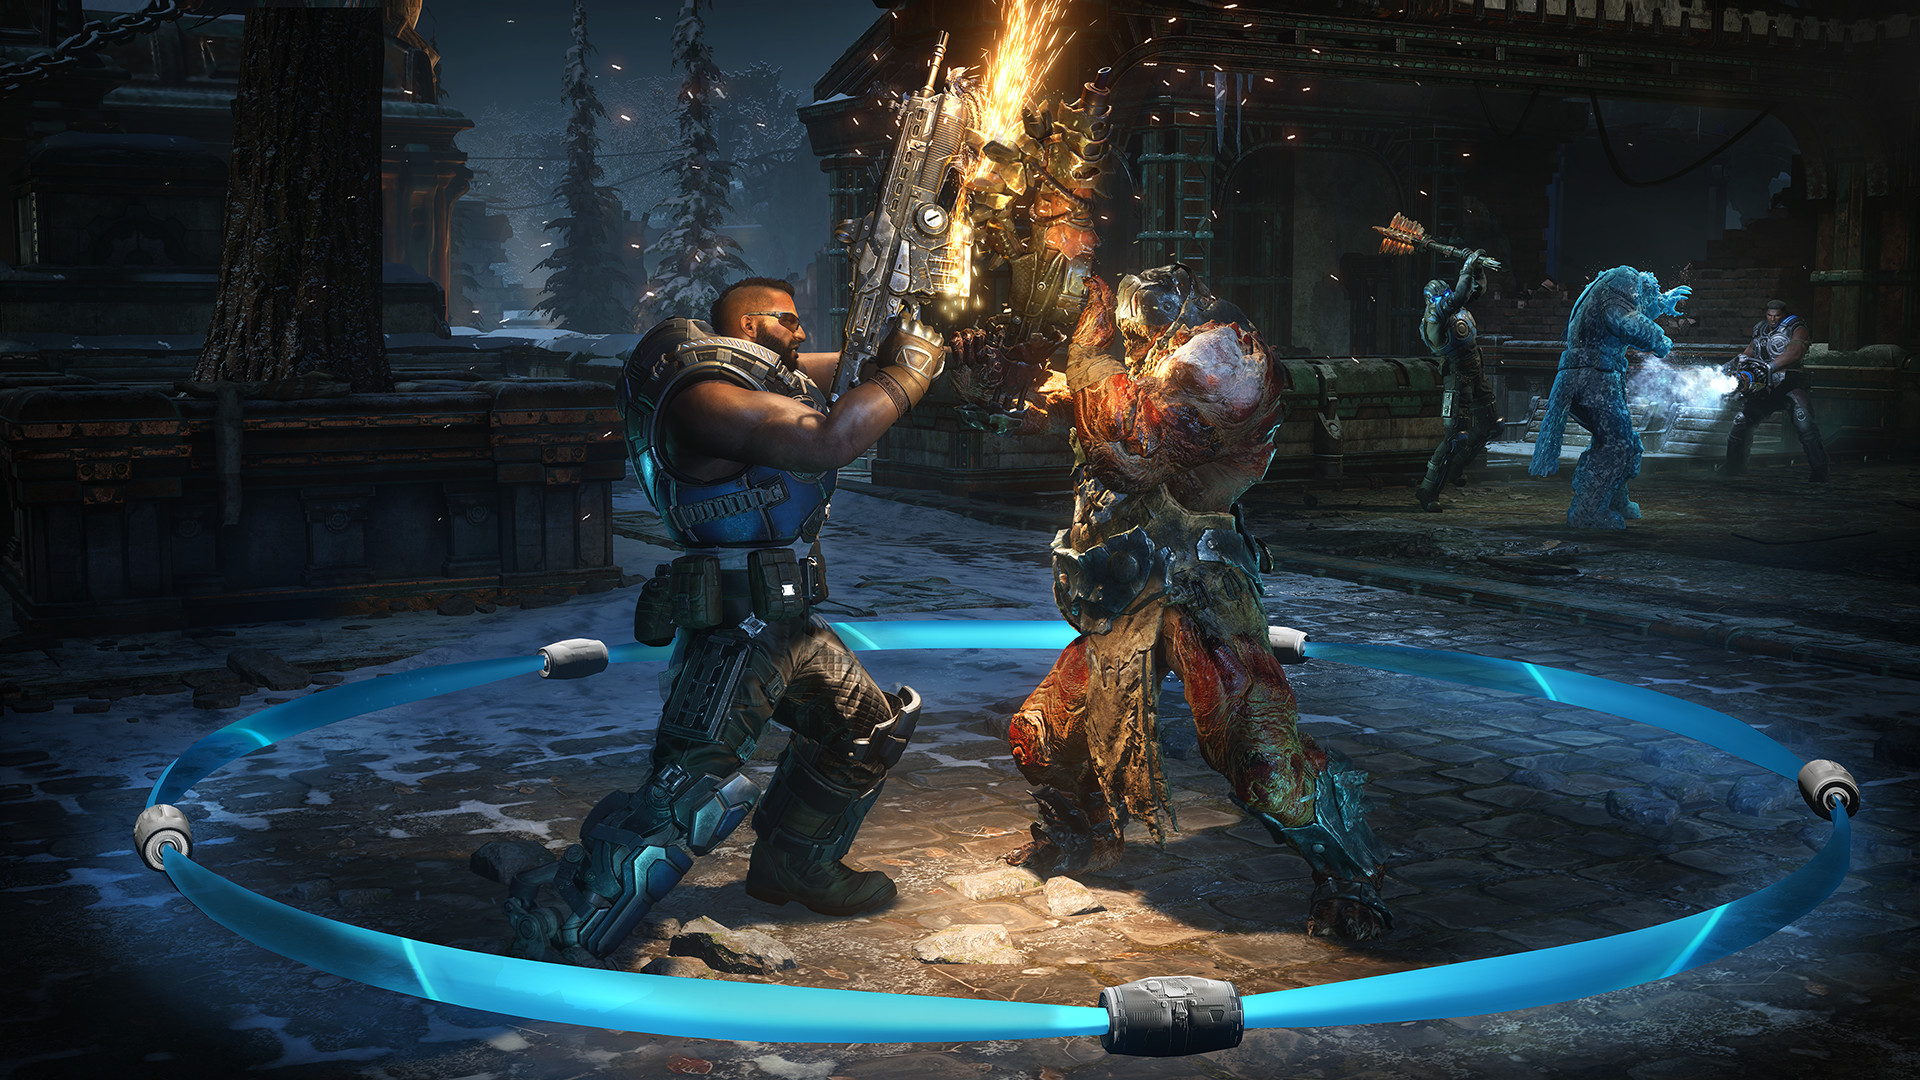 Gears 5 features “the largest campaign ever made” for the series